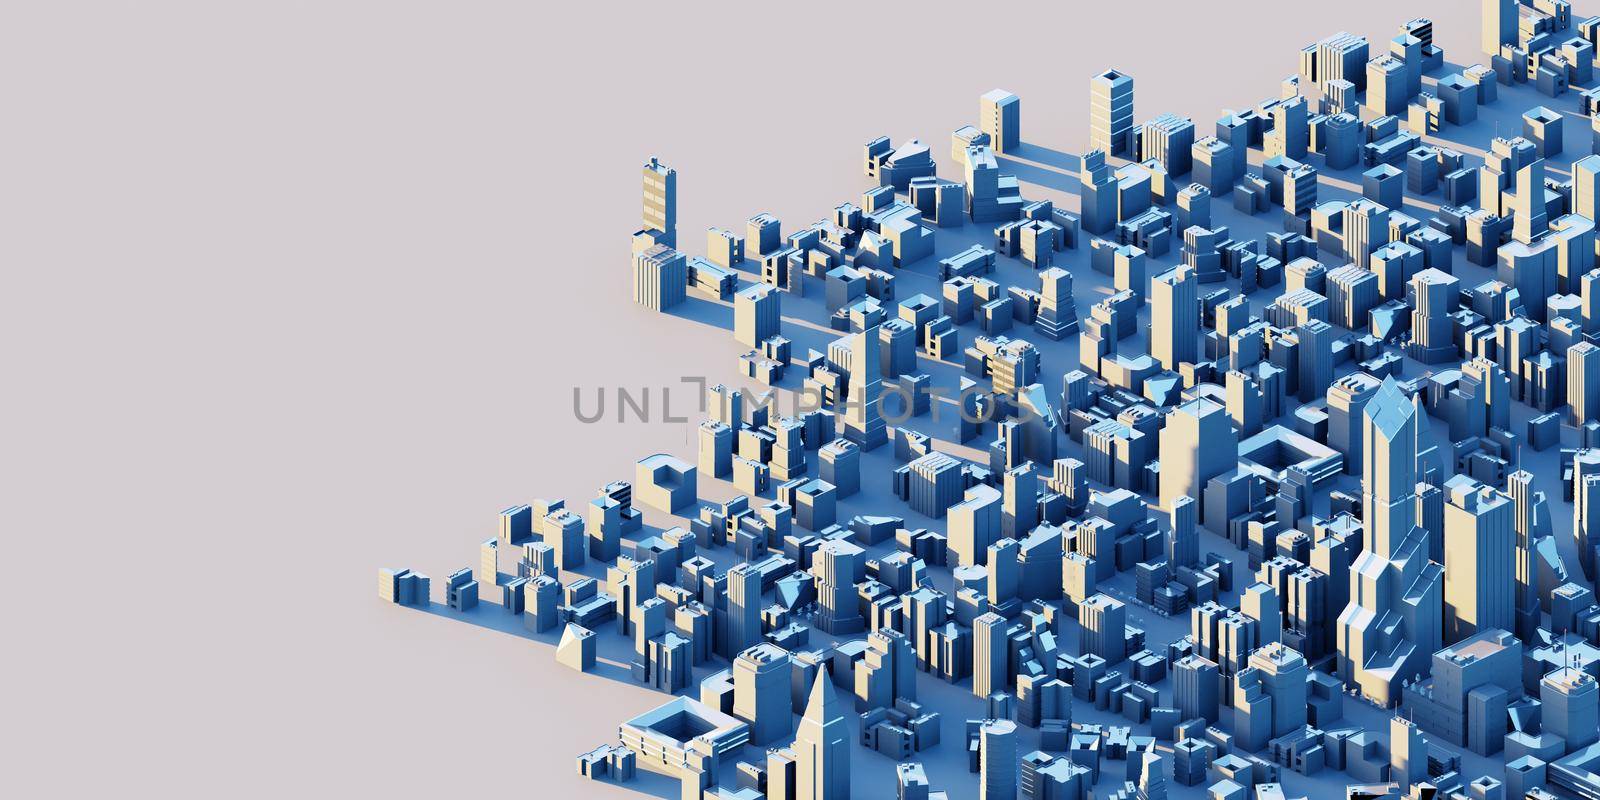 Modern, clean city in isometric perspective with white background. Digital 3D render.